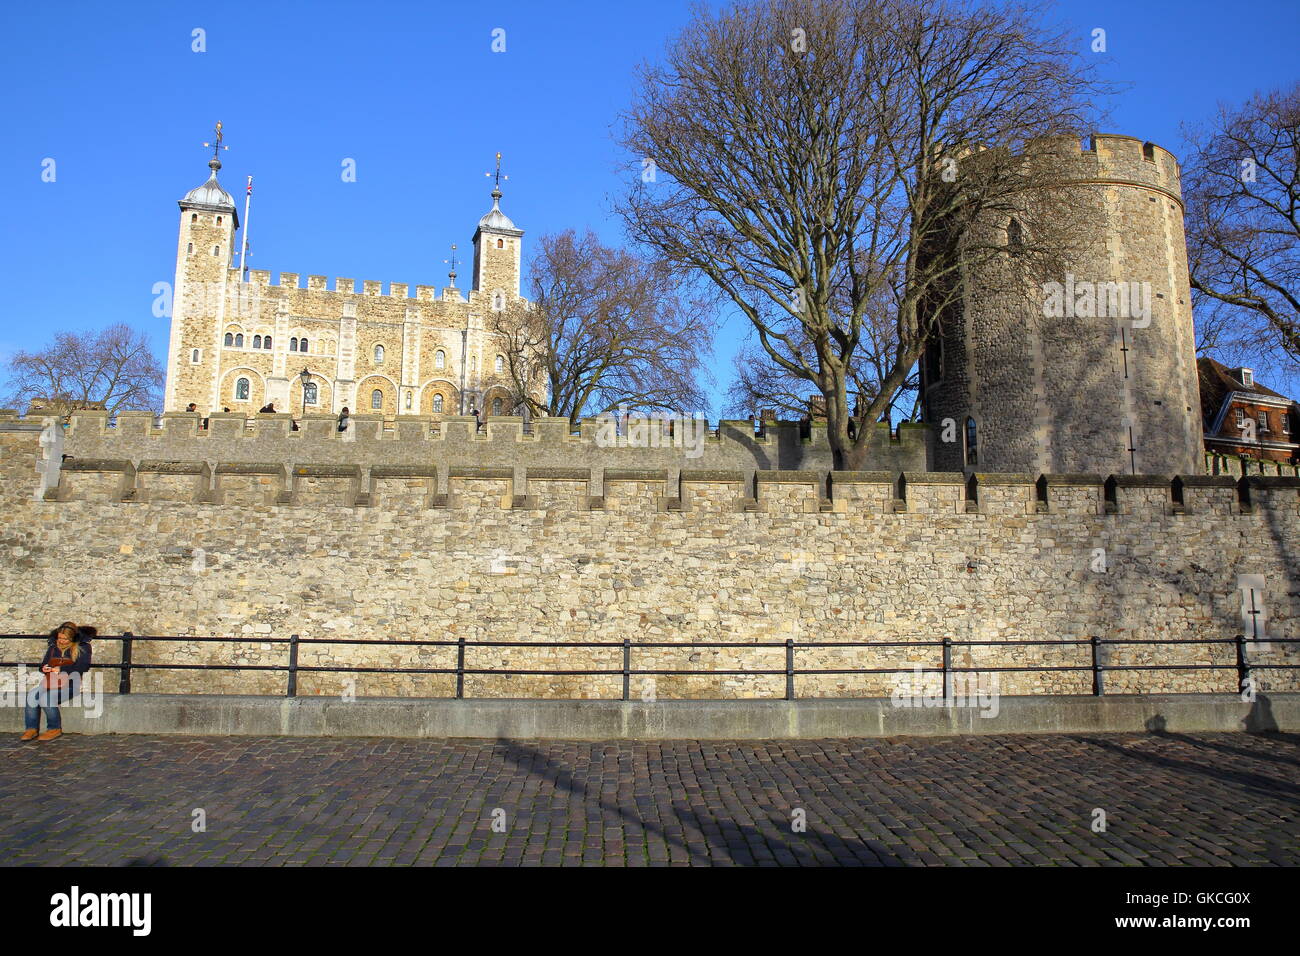 External view of the Tower of London with Winter colours, London, Great Britain Stock Photo